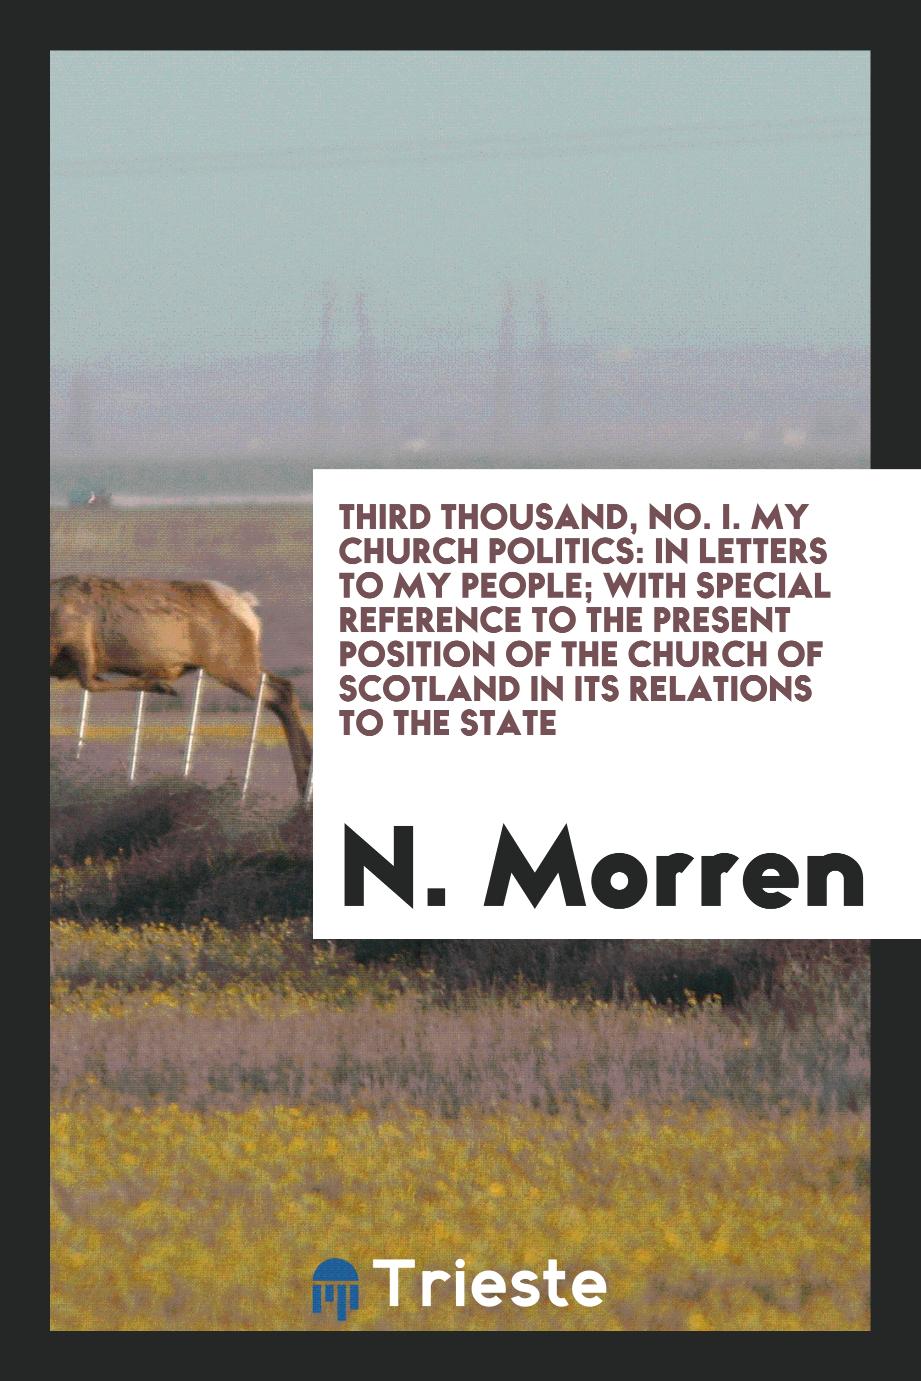 Third Thousand, No. I. My Church Politics: In Letters to My People; With Special Reference to the Present Position of the Church of Scotland in Its Relations to the State